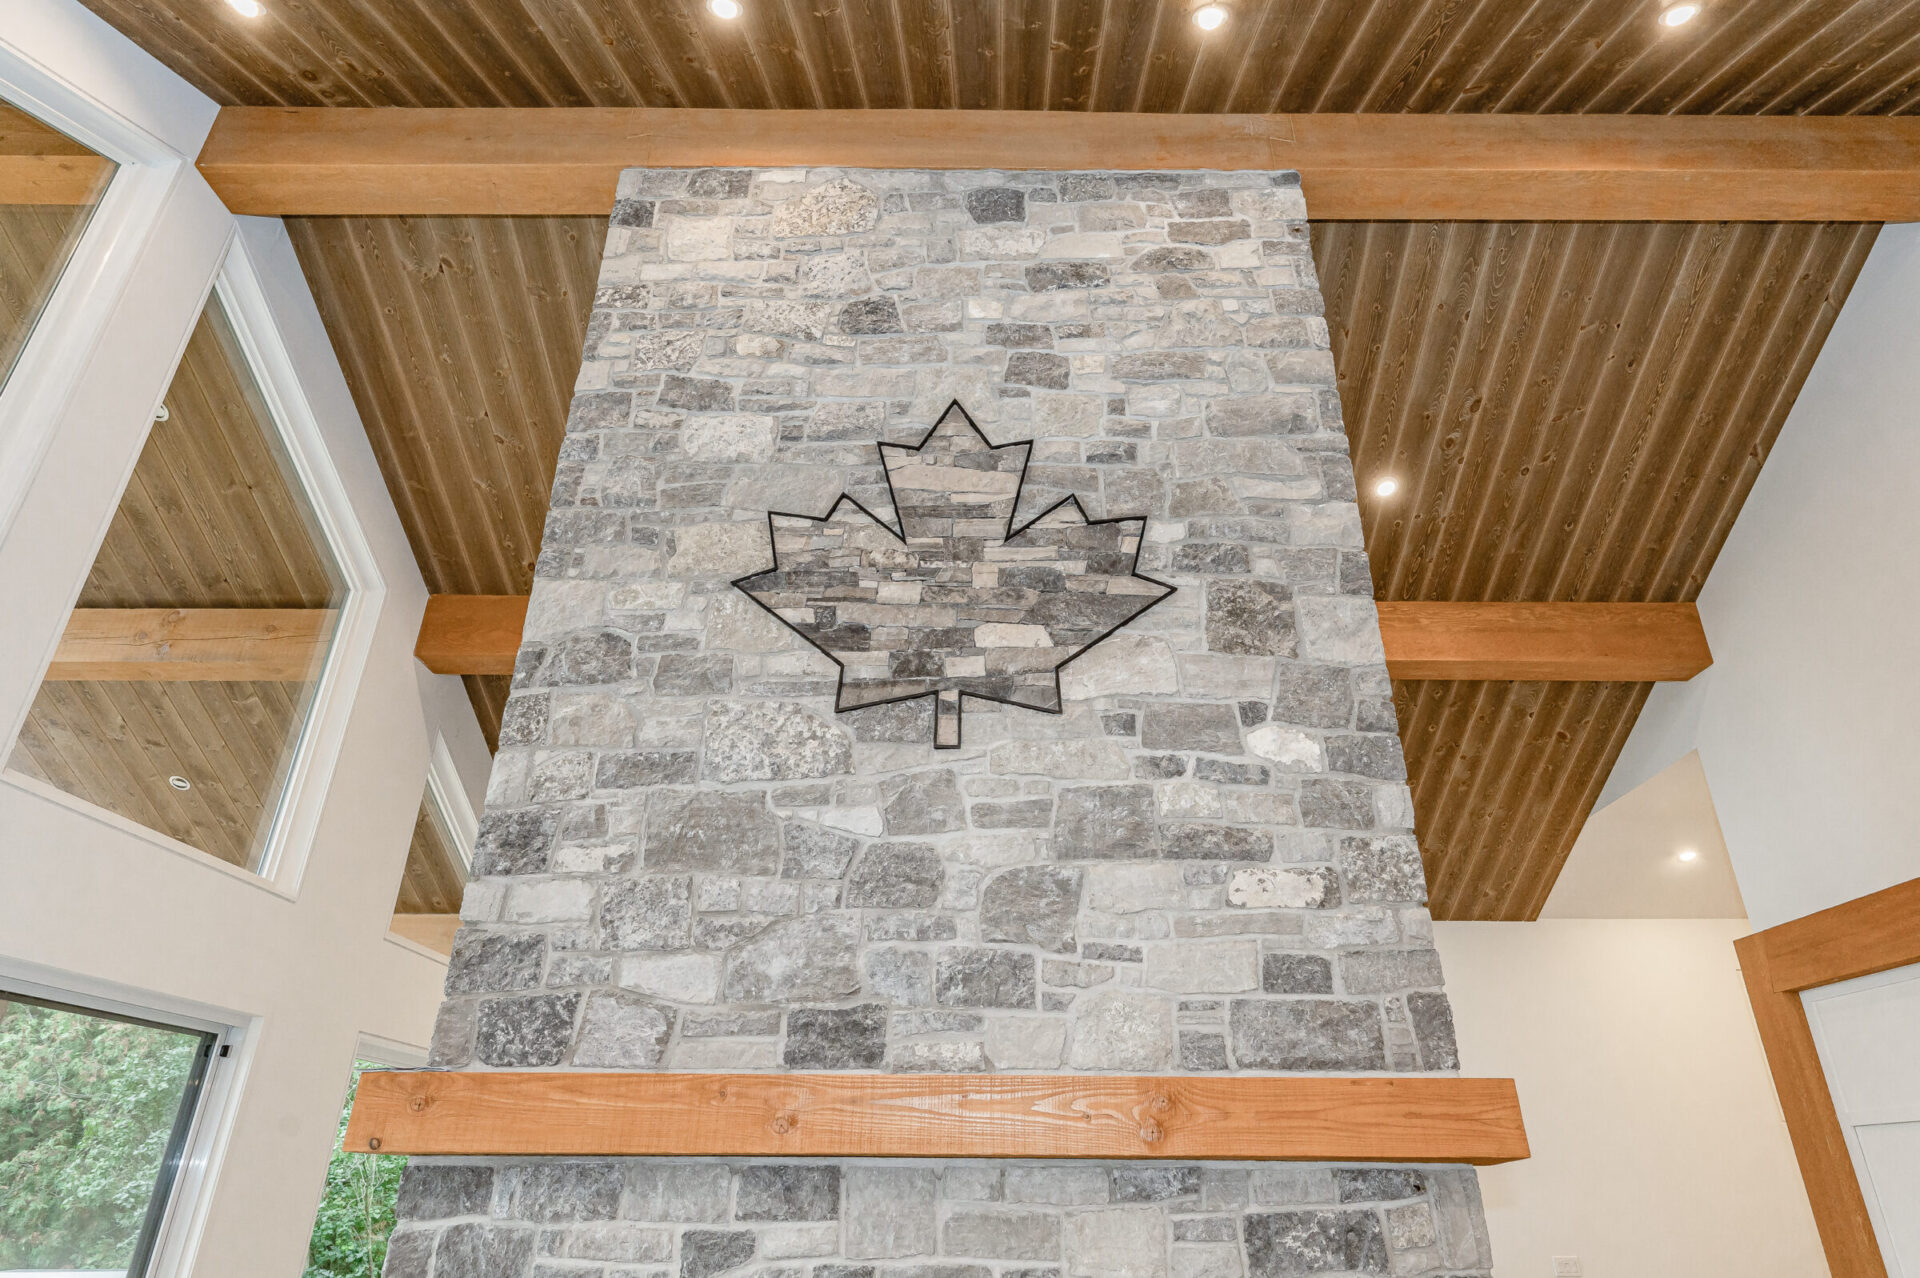 This image features an interior space with a stone wall with a leaf-shaped design inlay, wooden ceiling beams, recessed lighting, and door frames.